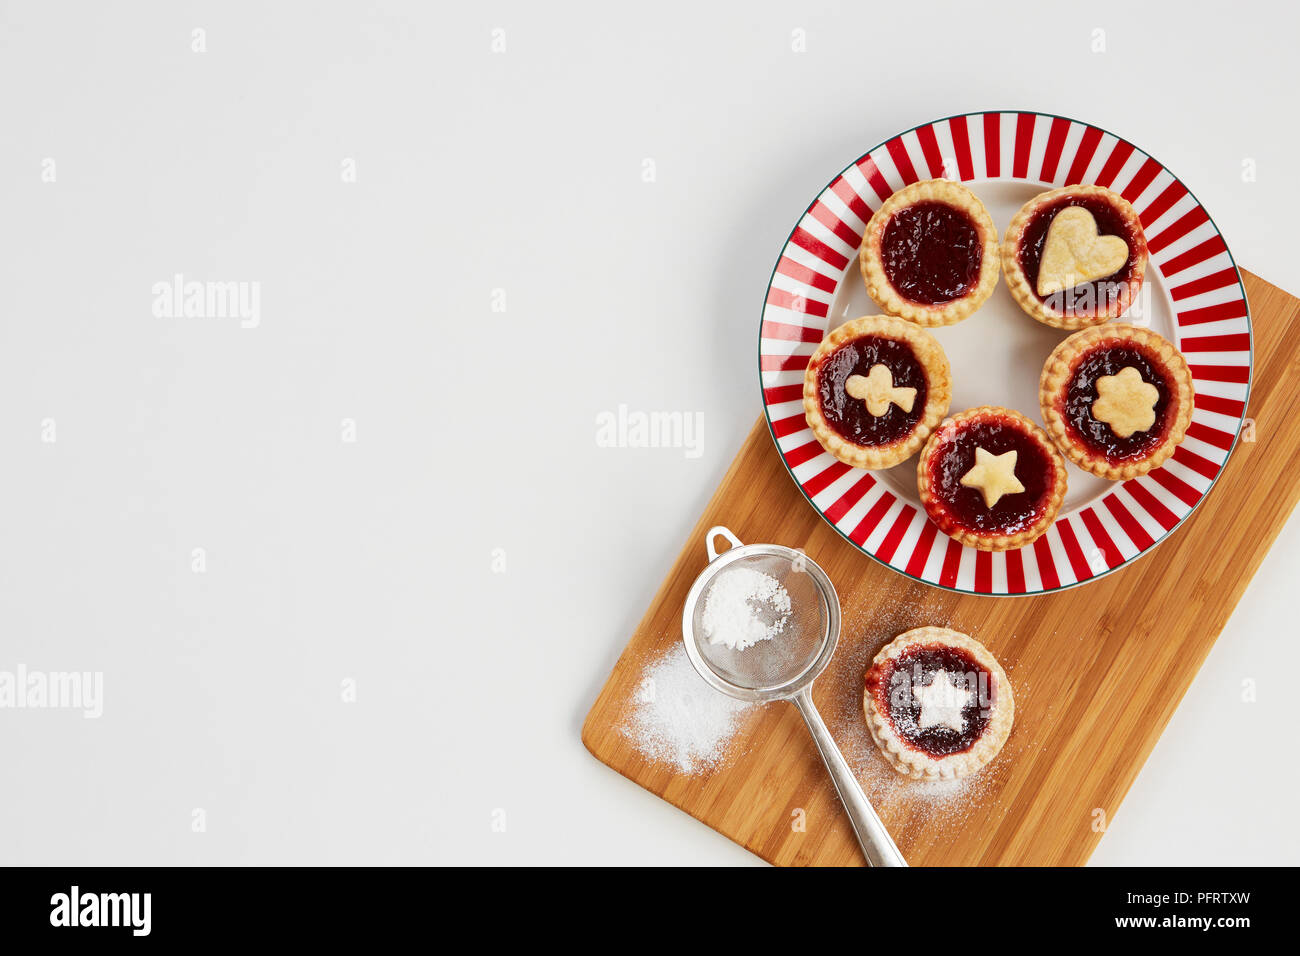 Plate of jam tarts on a wooden board Stock Photo